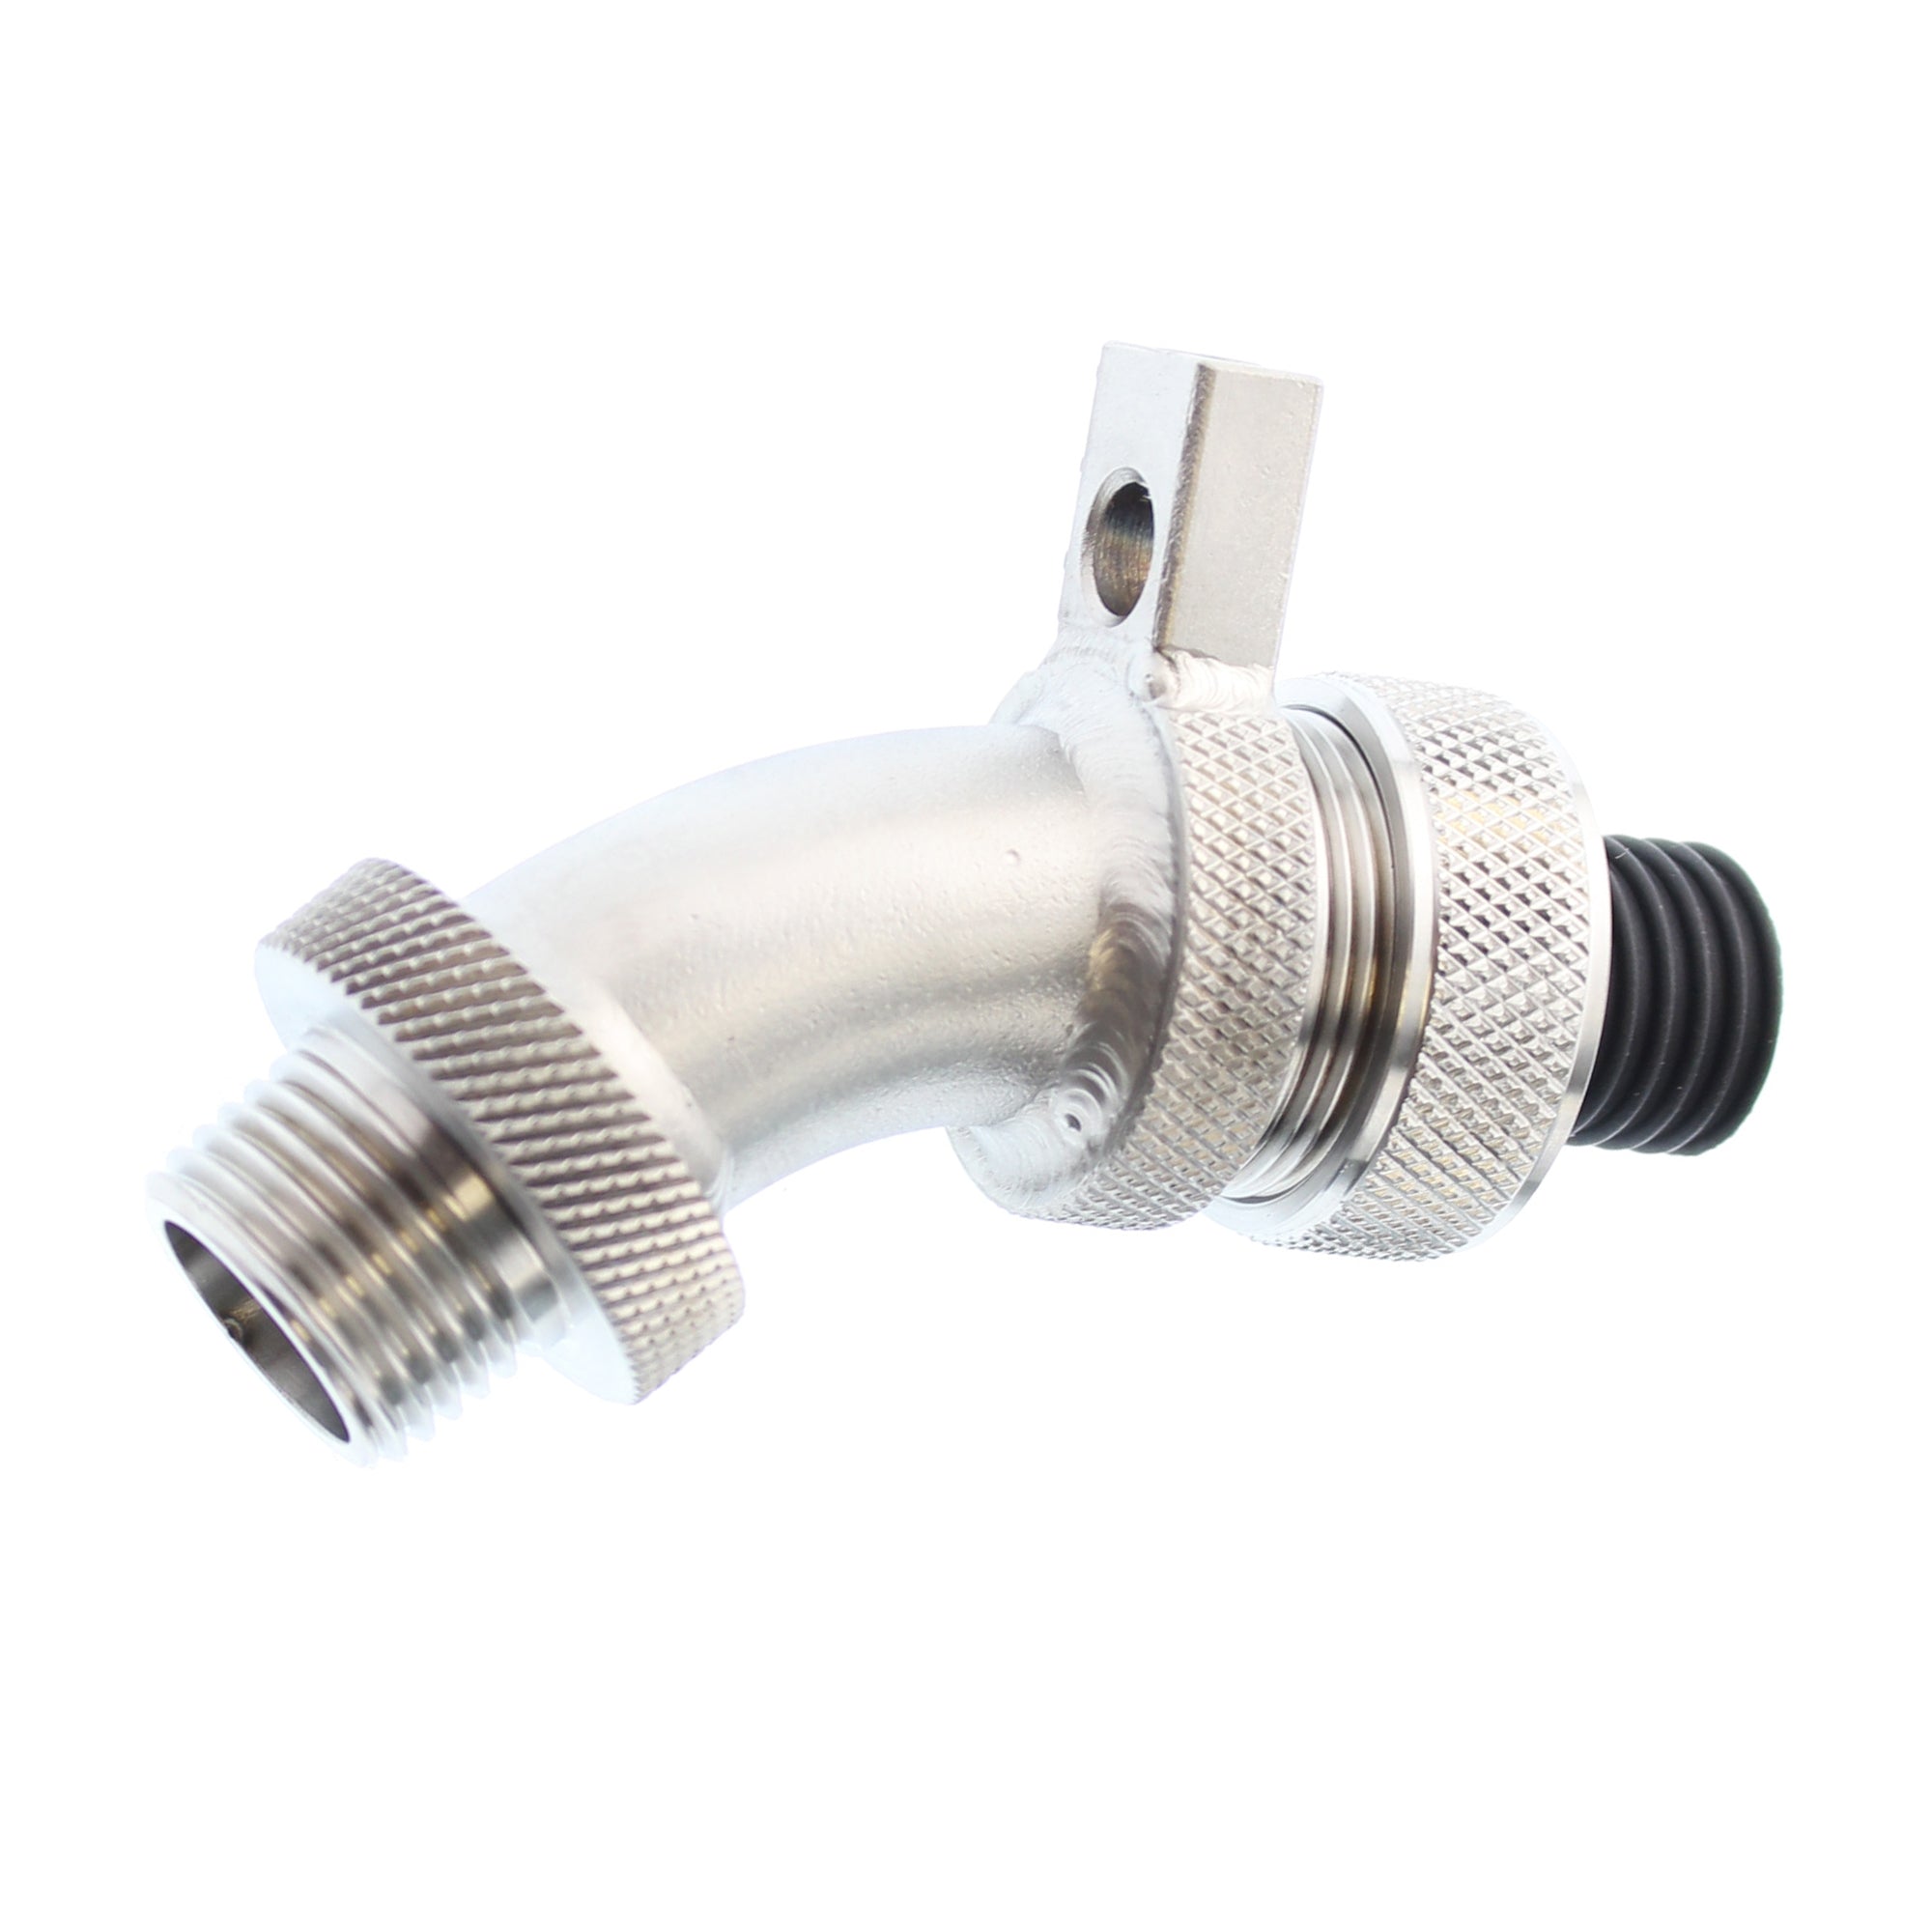 Boaflex, AMERICANBOA BOAFLEX NBLC-050-03-MG-45 STAINLESS-STEEL CONDUIT CONNECTOR, 1/2"